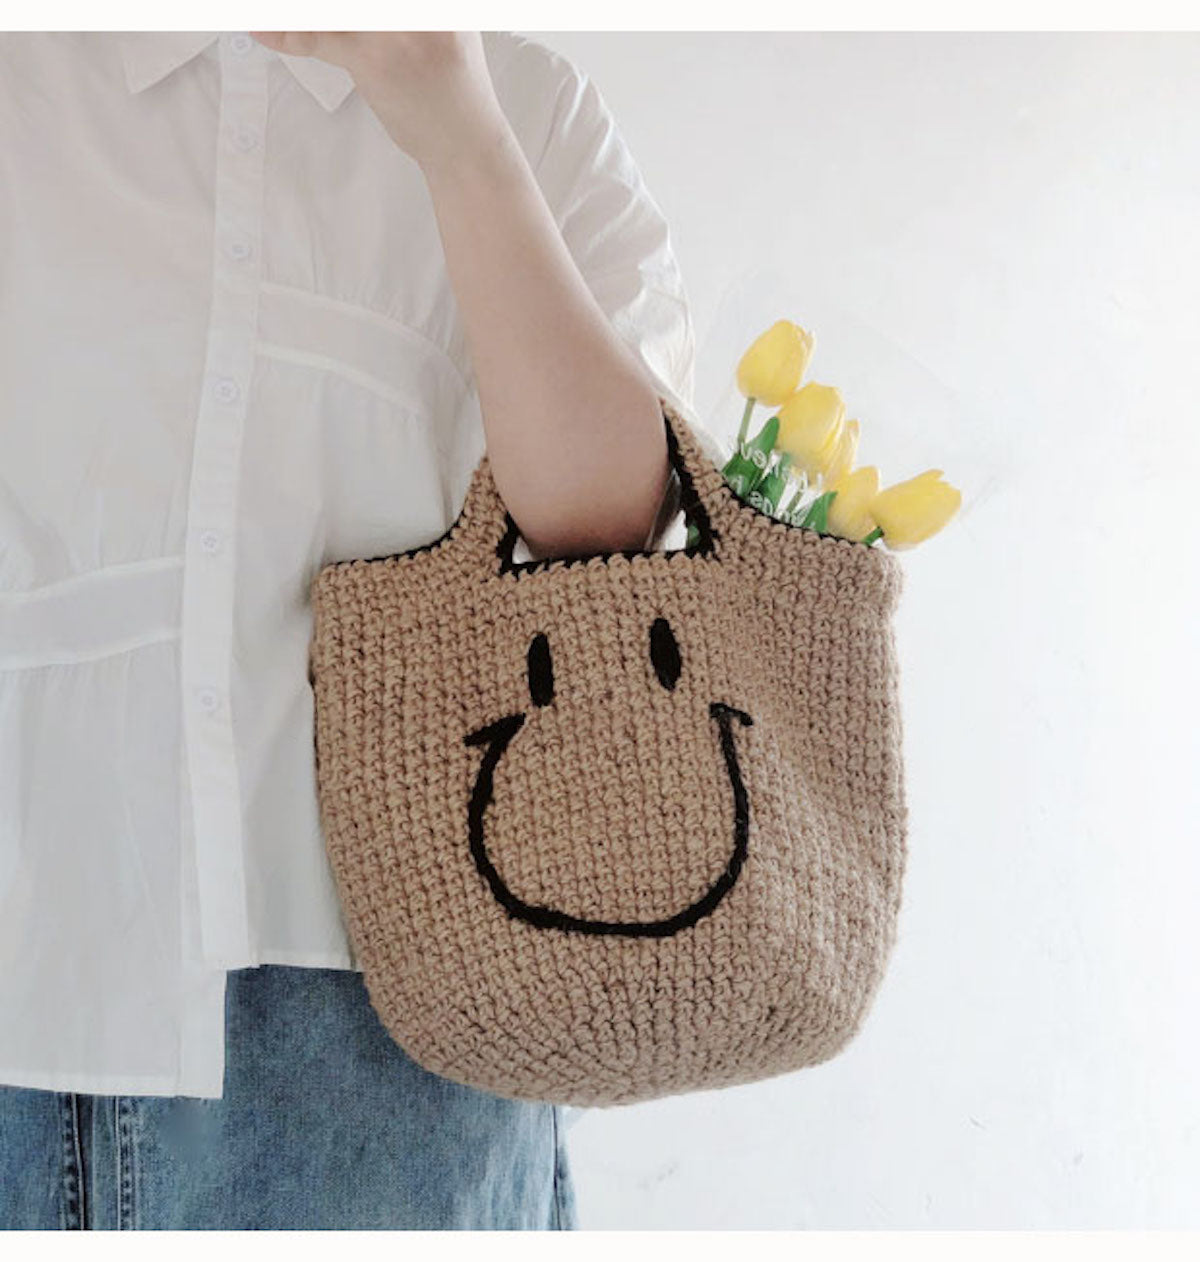 Crafty Crochet 'Smiley Slogans' Tote Bag By So Close |  notonthehighstreet.com